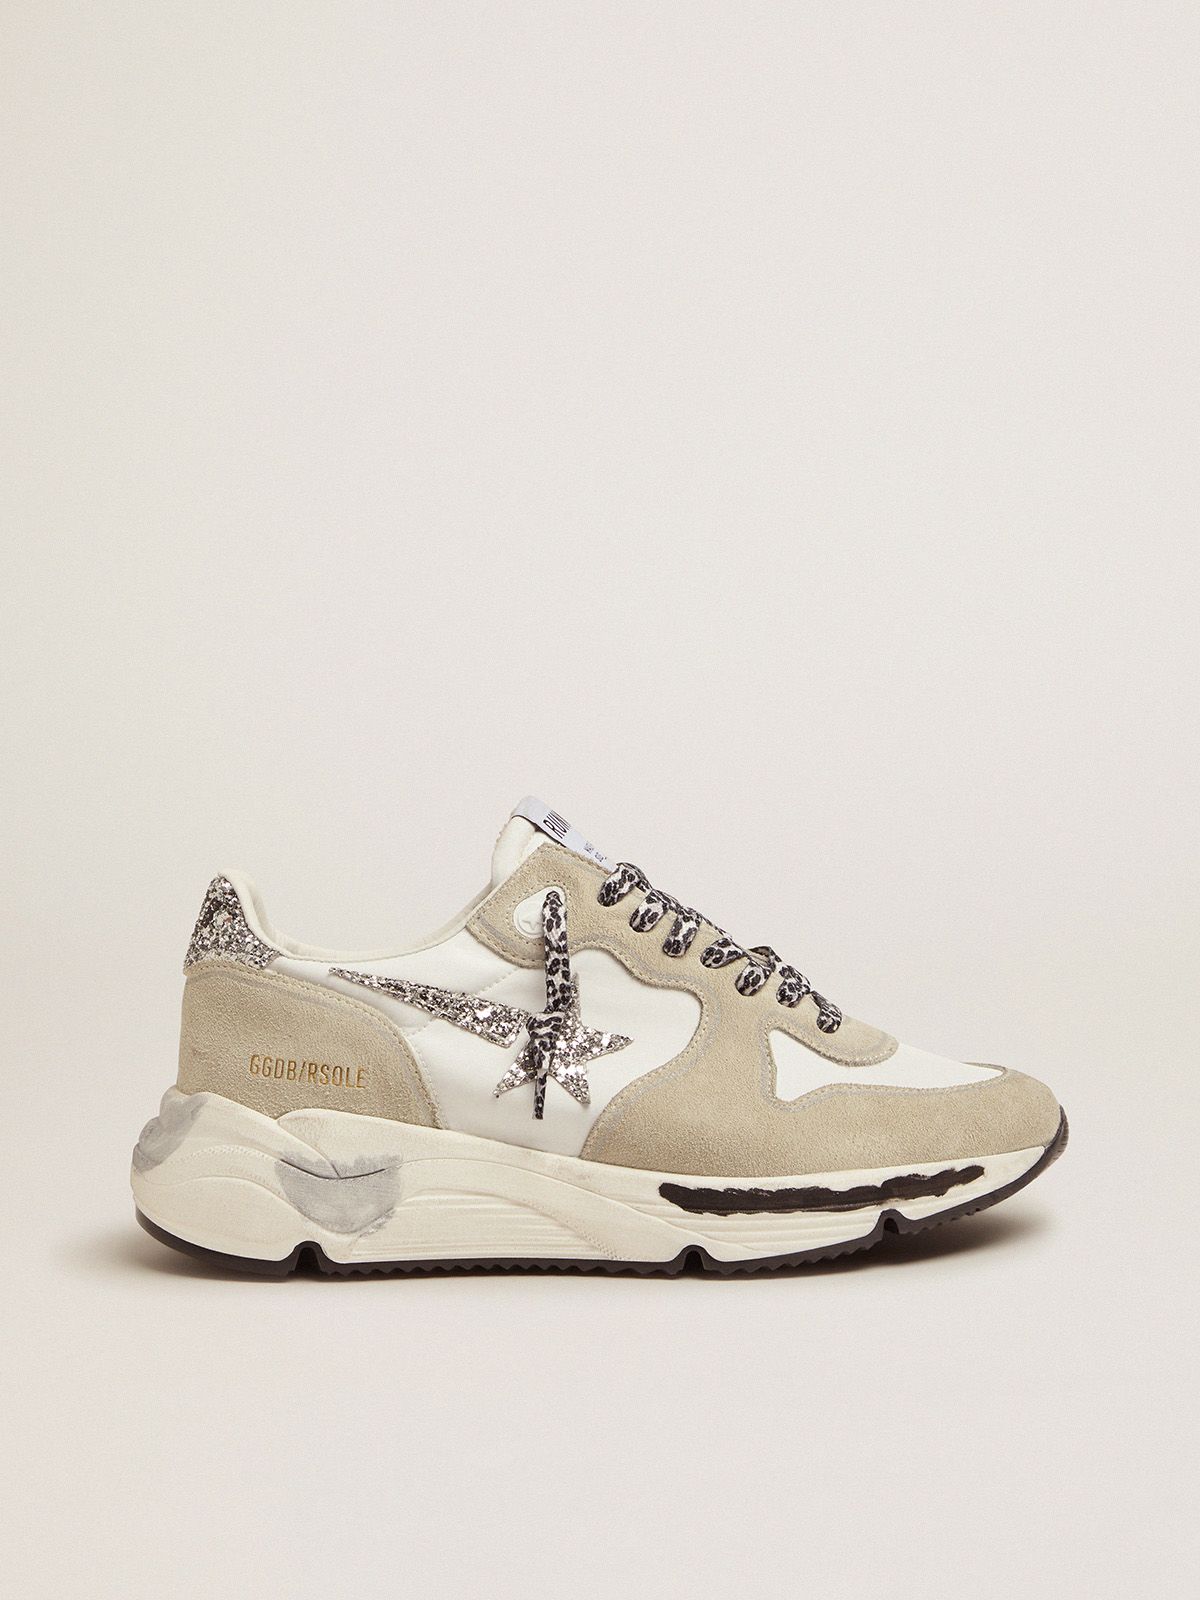 Golden Goose Ball Star Uomo Running Sole in nylon and suede with glitter Golden star